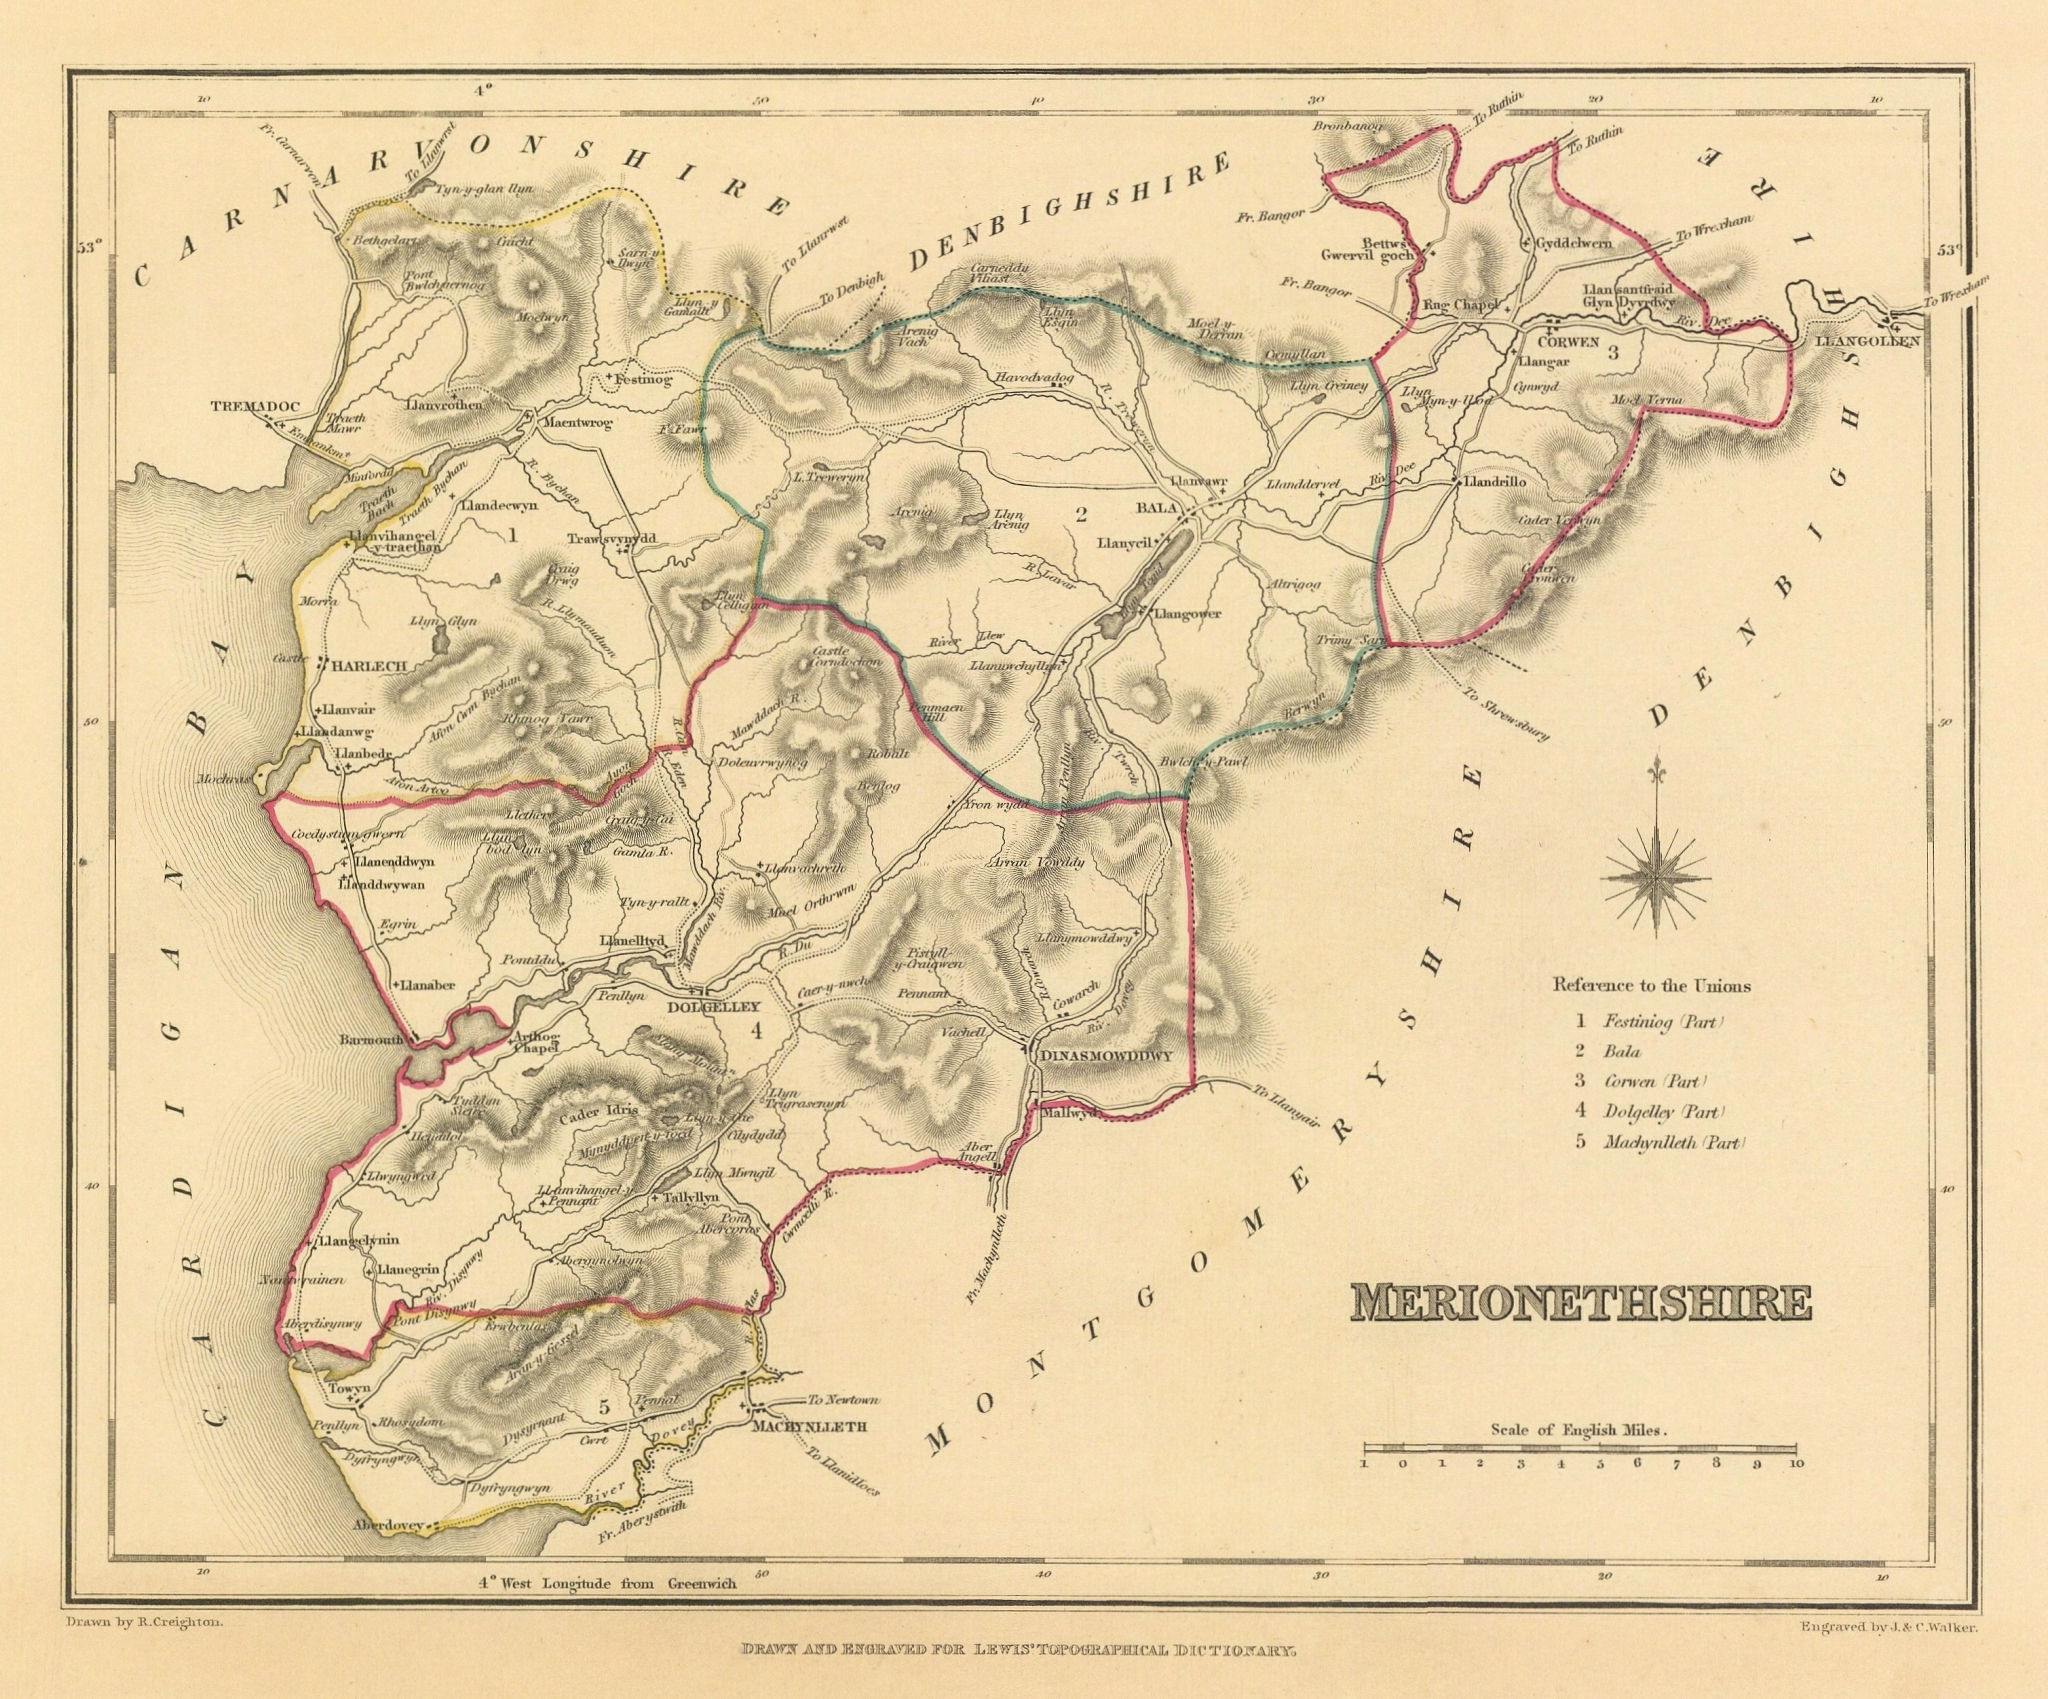 Associate Product Antique county map of MERIONETHSHIRE by Creighton & Walker for Lewis c1840